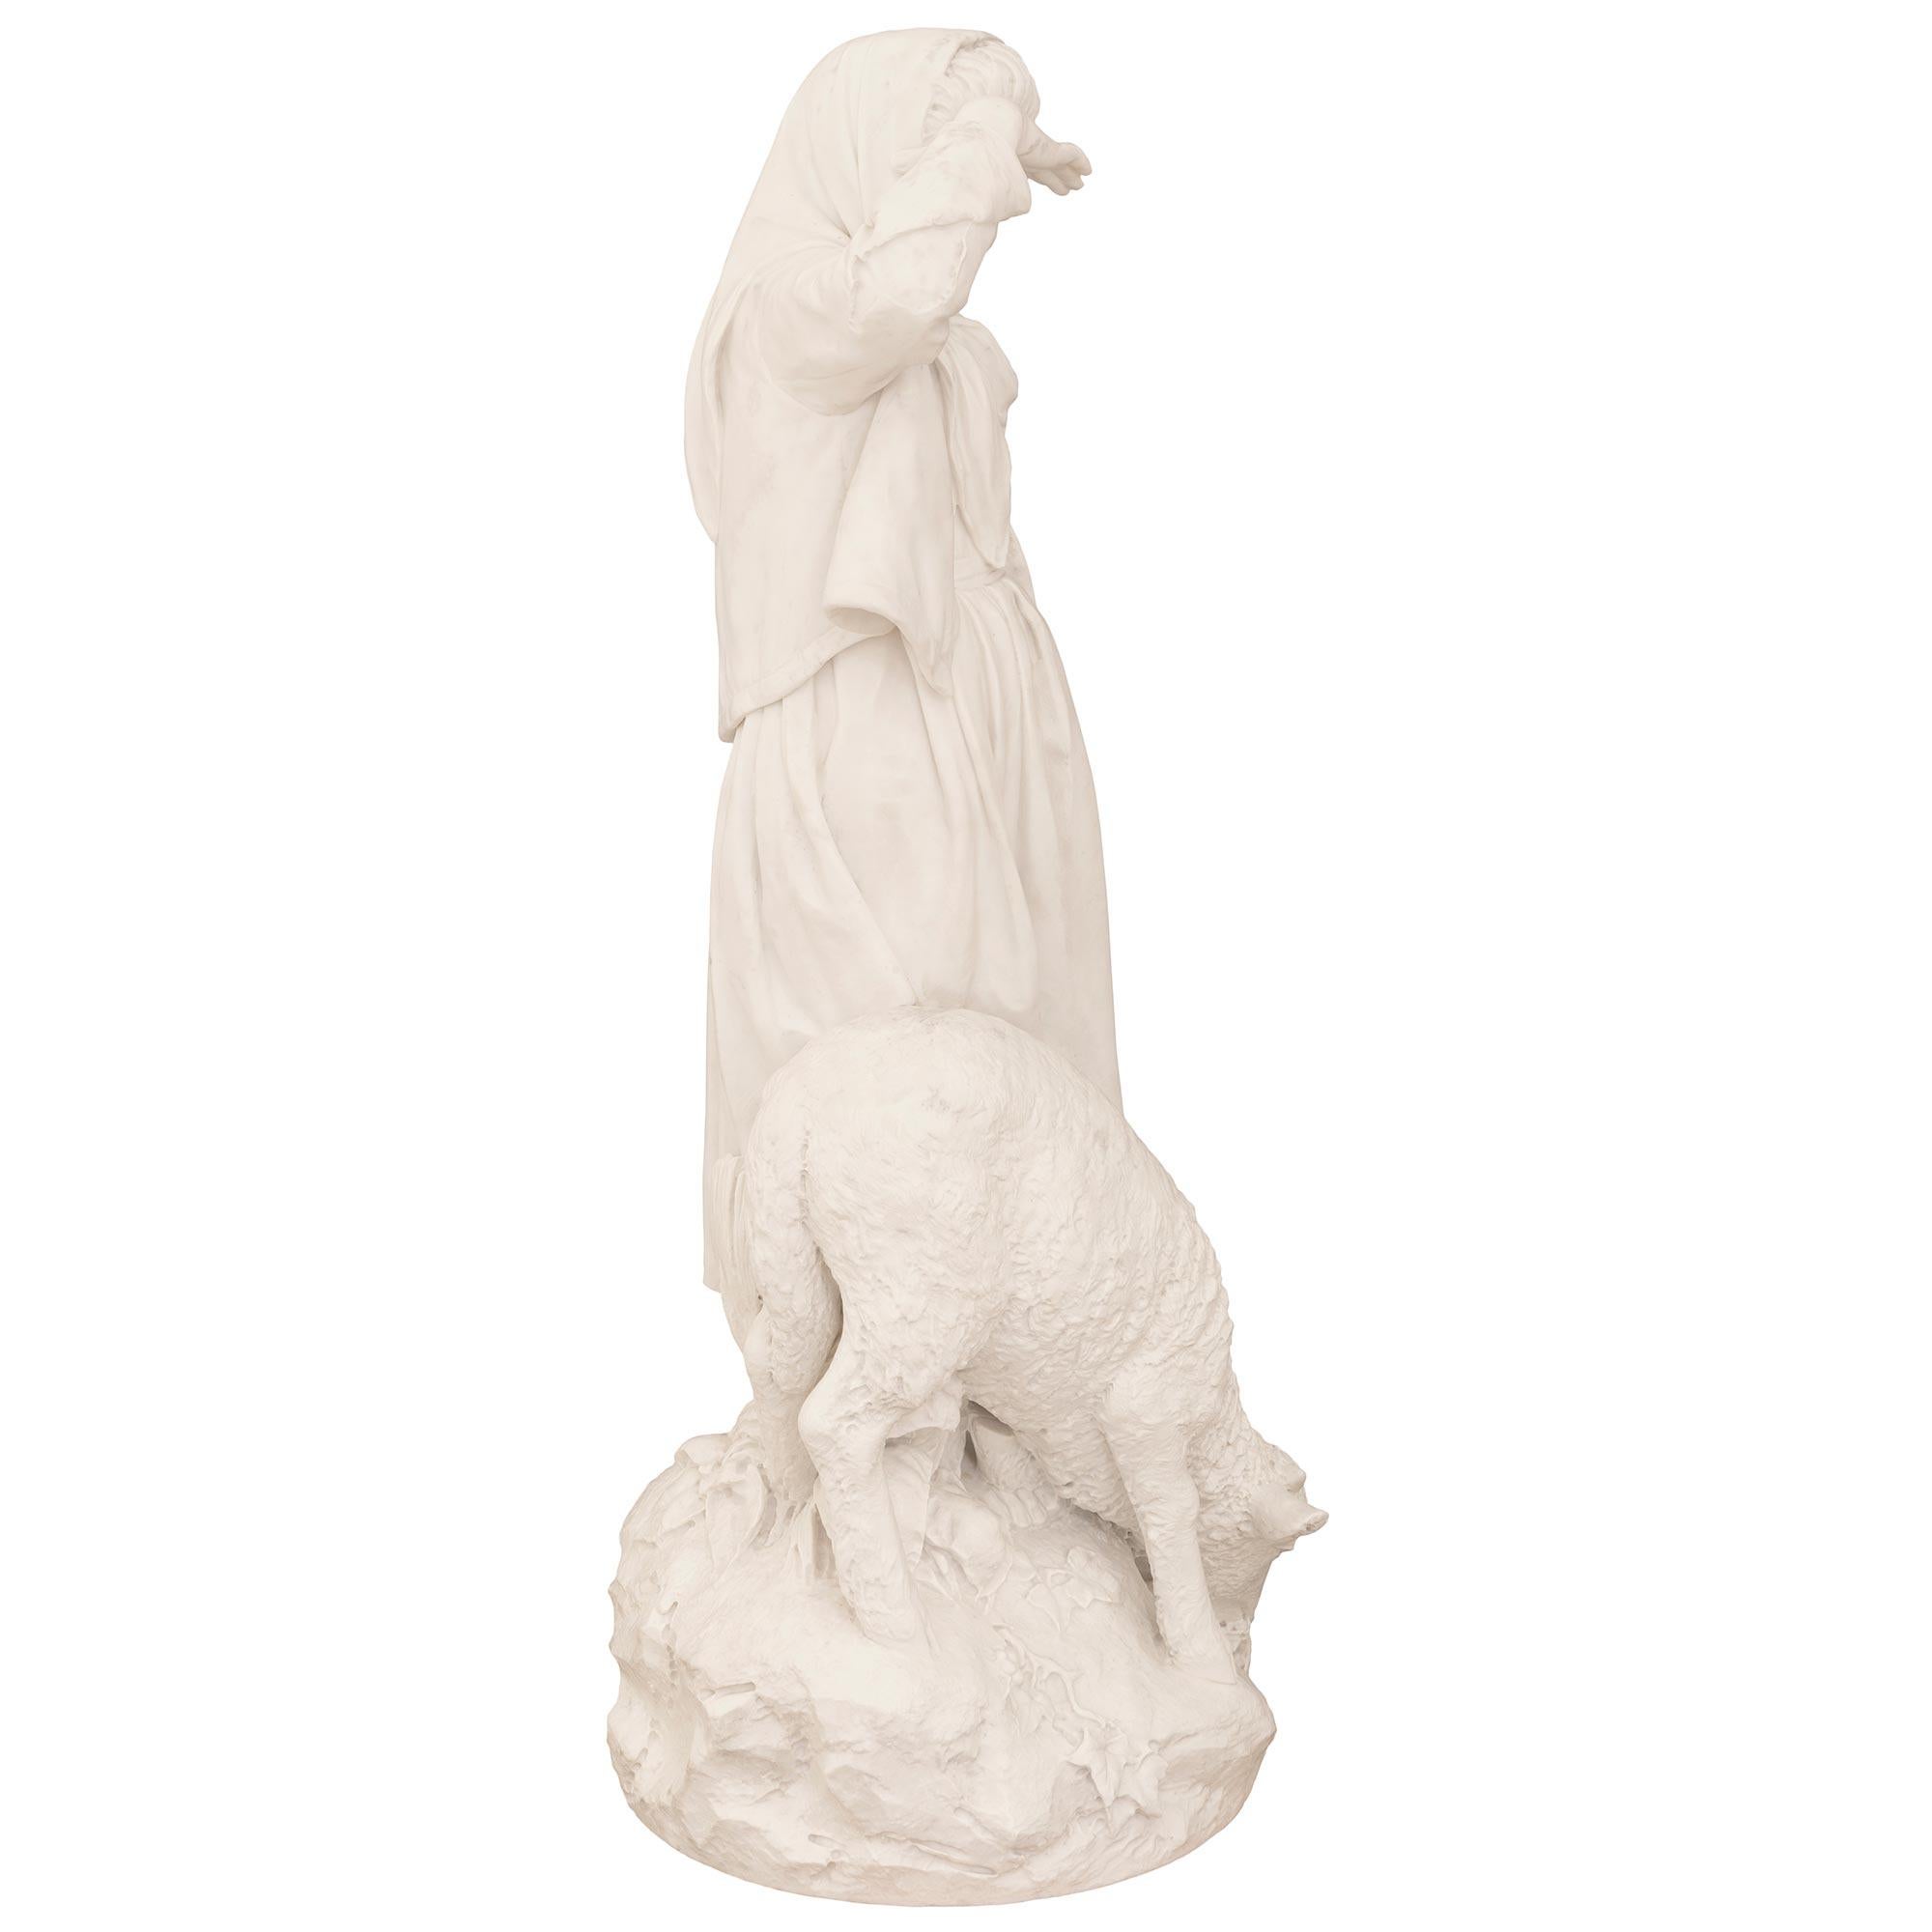 Italian 19th Century White Carrara Marble Statue In Good Condition For Sale In West Palm Beach, FL